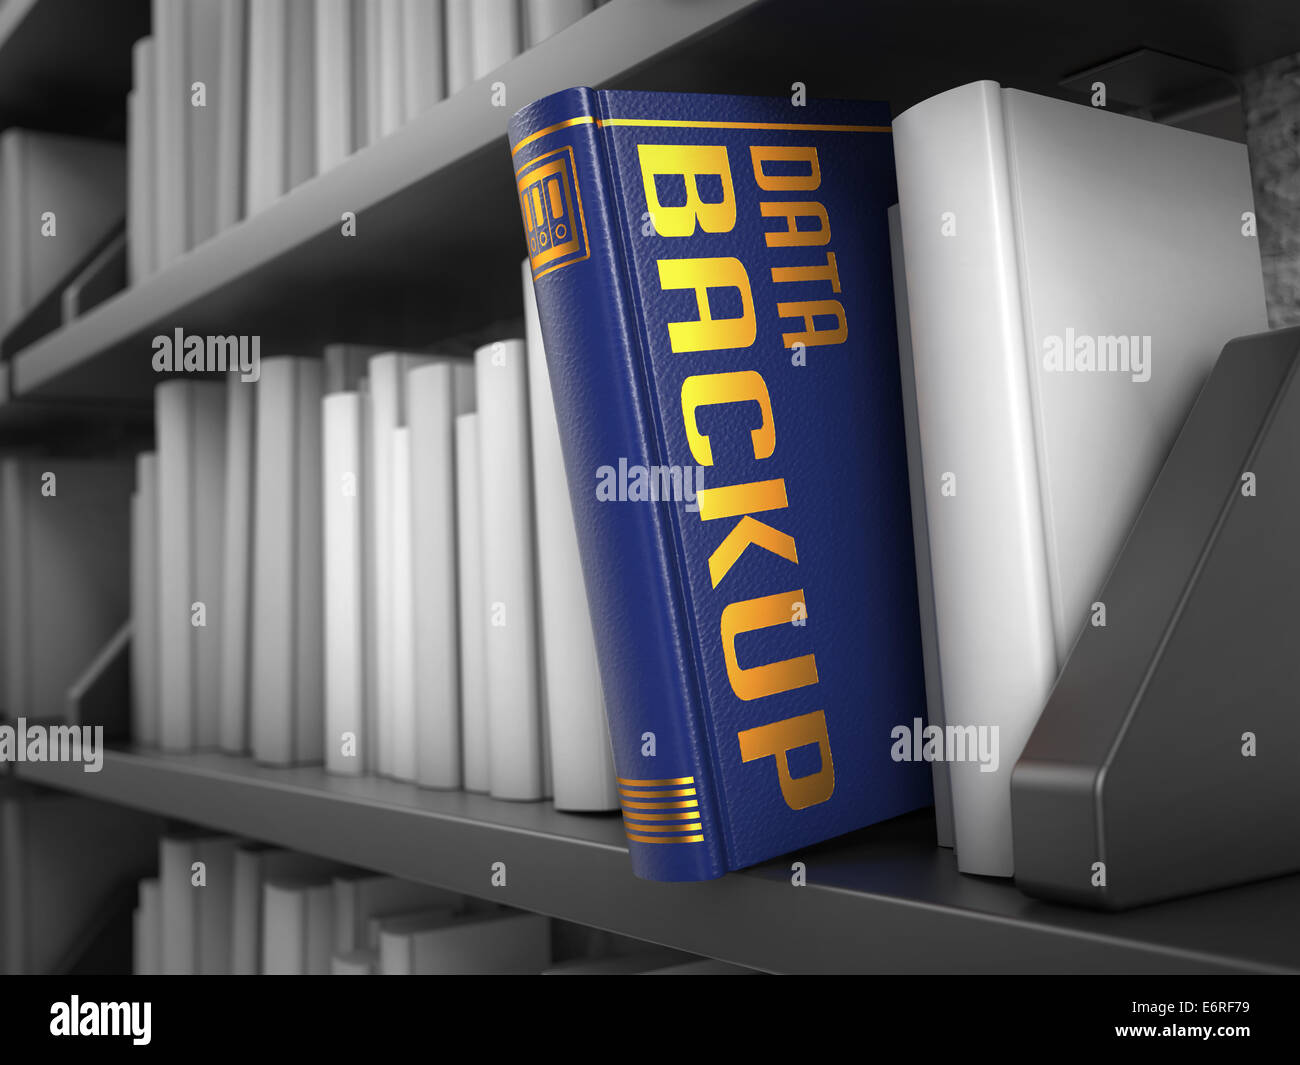 Data Backup - Title of Book. Stock Photo